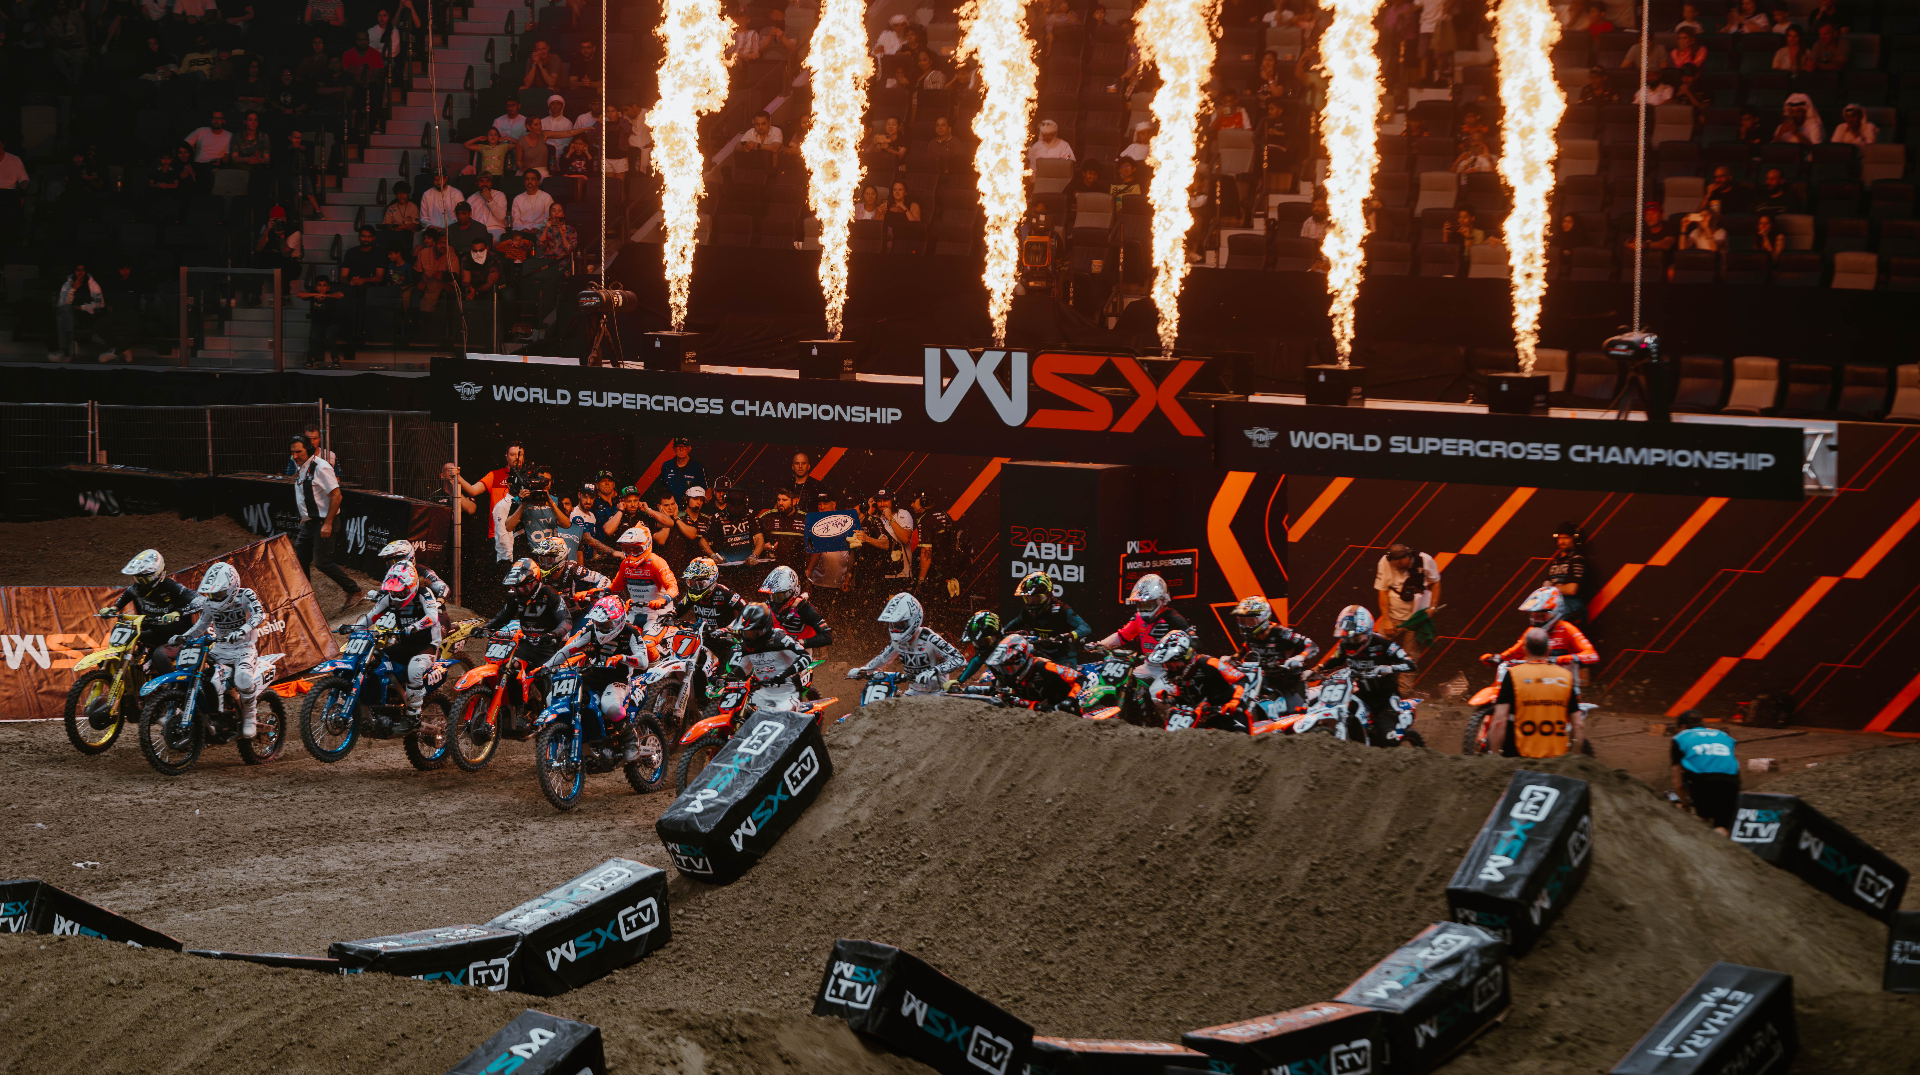 WORLD SUPERCROSS ABU DHABI GRAND PRIX MAKES HISTORY AS THE MIDDLE EAST’S FIRST EVER INTERNATIONAL SUPERCROSS EVENT